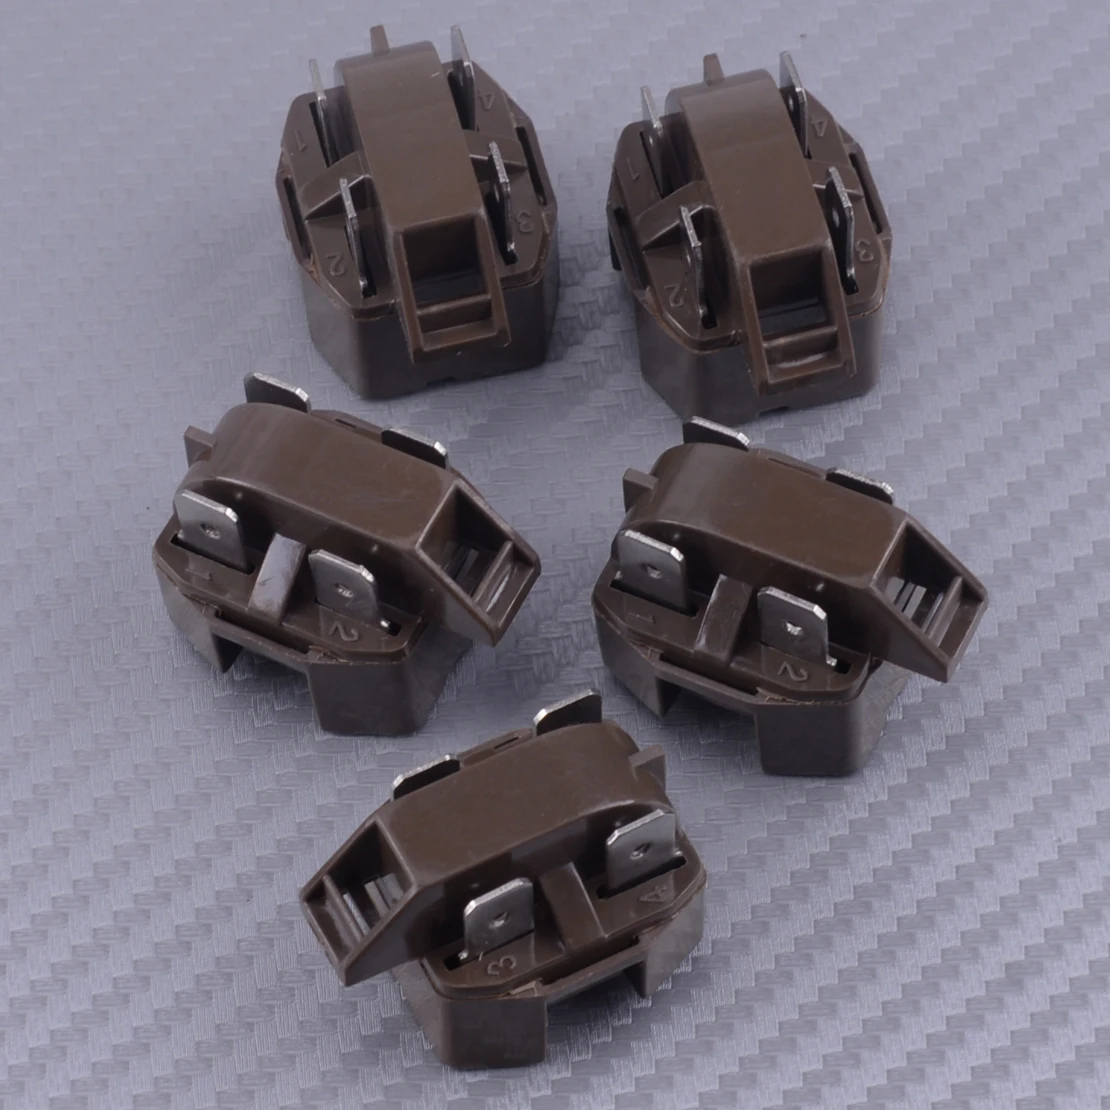 New 5pcs 4 Pin PTC Start Relay IC-4 Fit For Refrigerator Freezer Compressor Appliance Parts 2262185